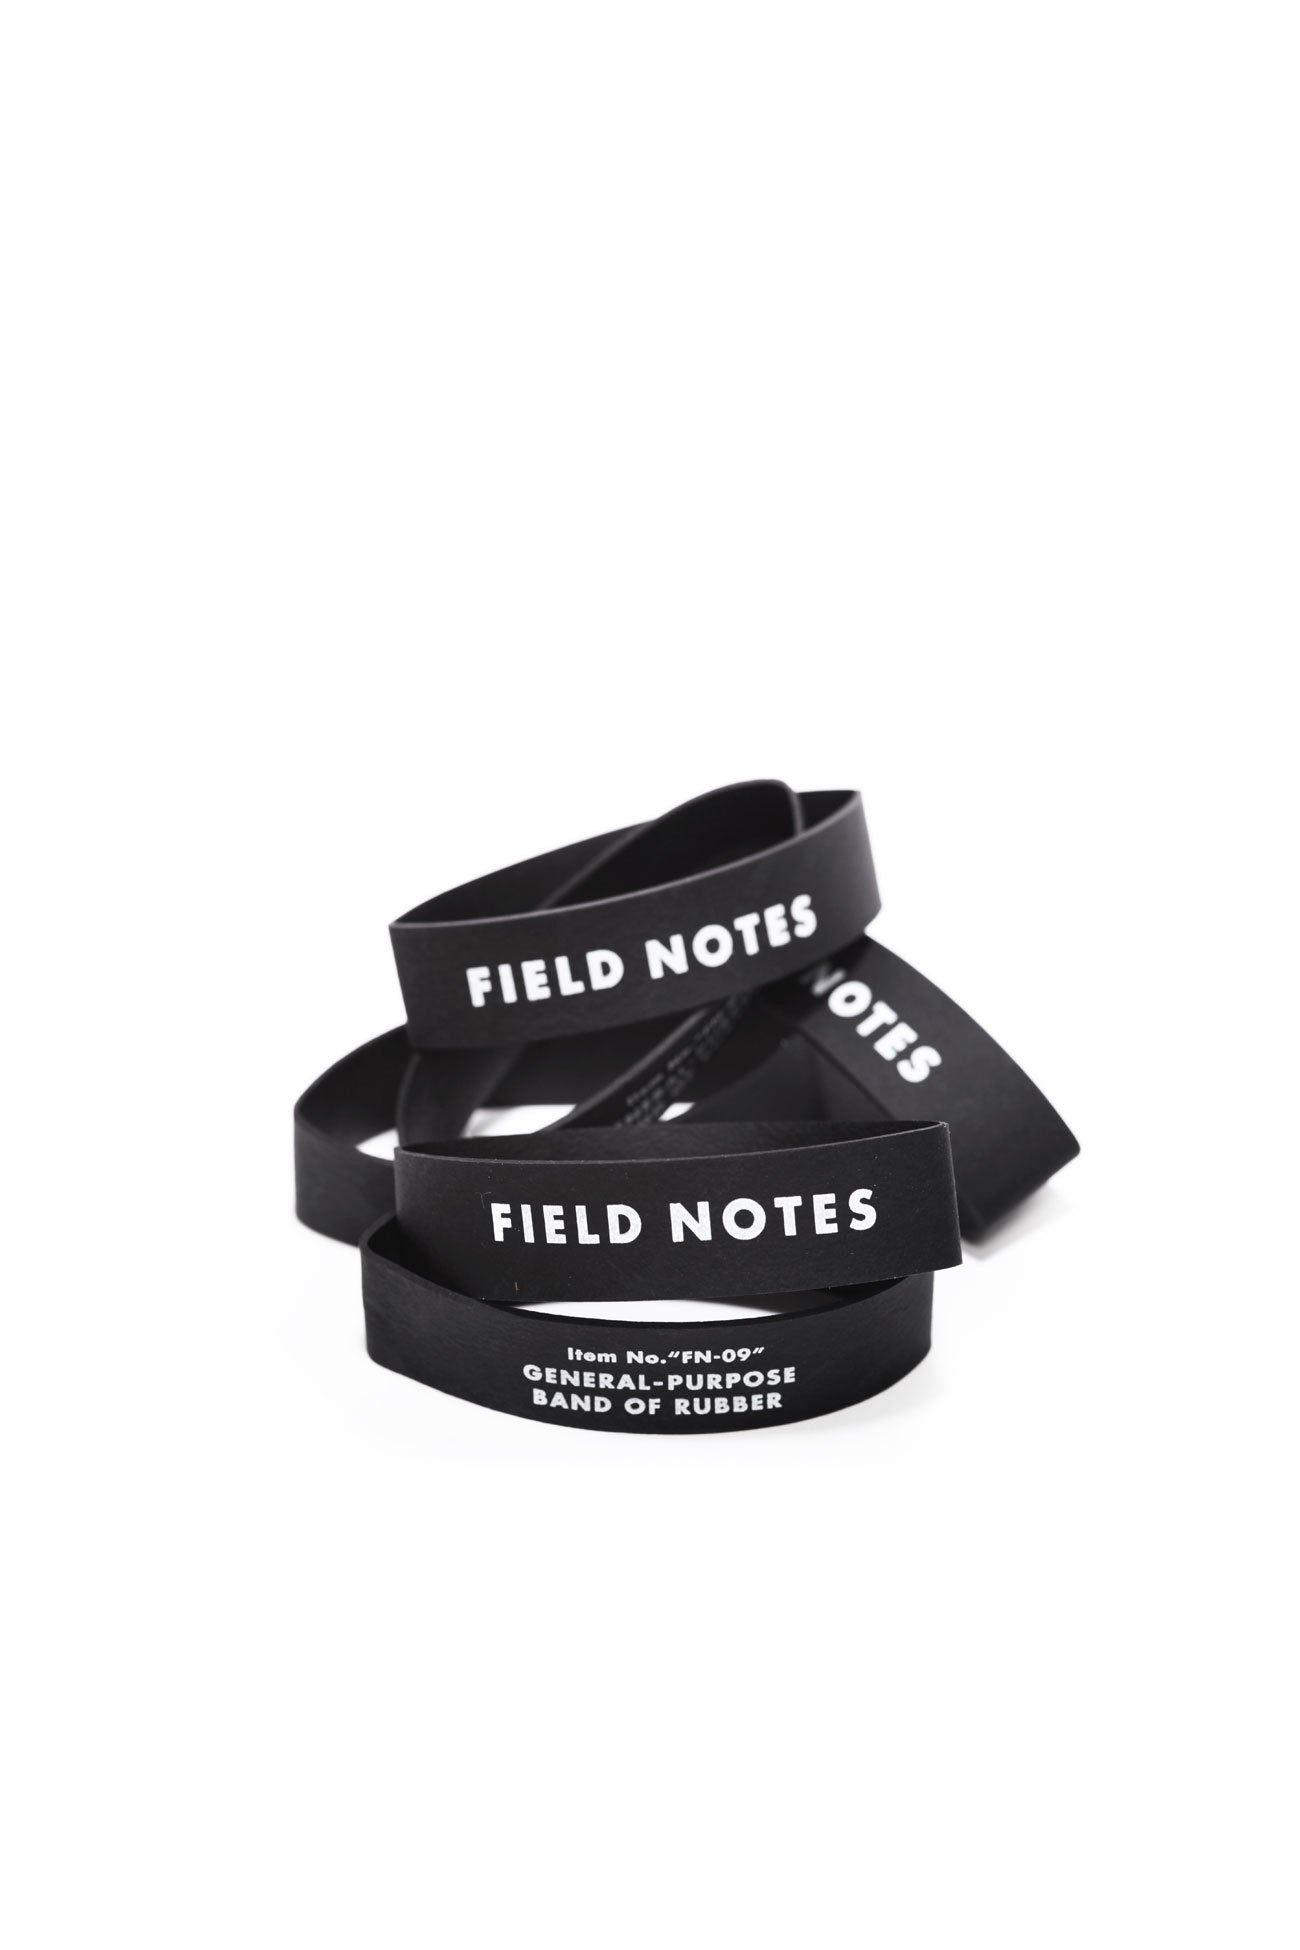 Field Notes Band of Rubber 12 Pack